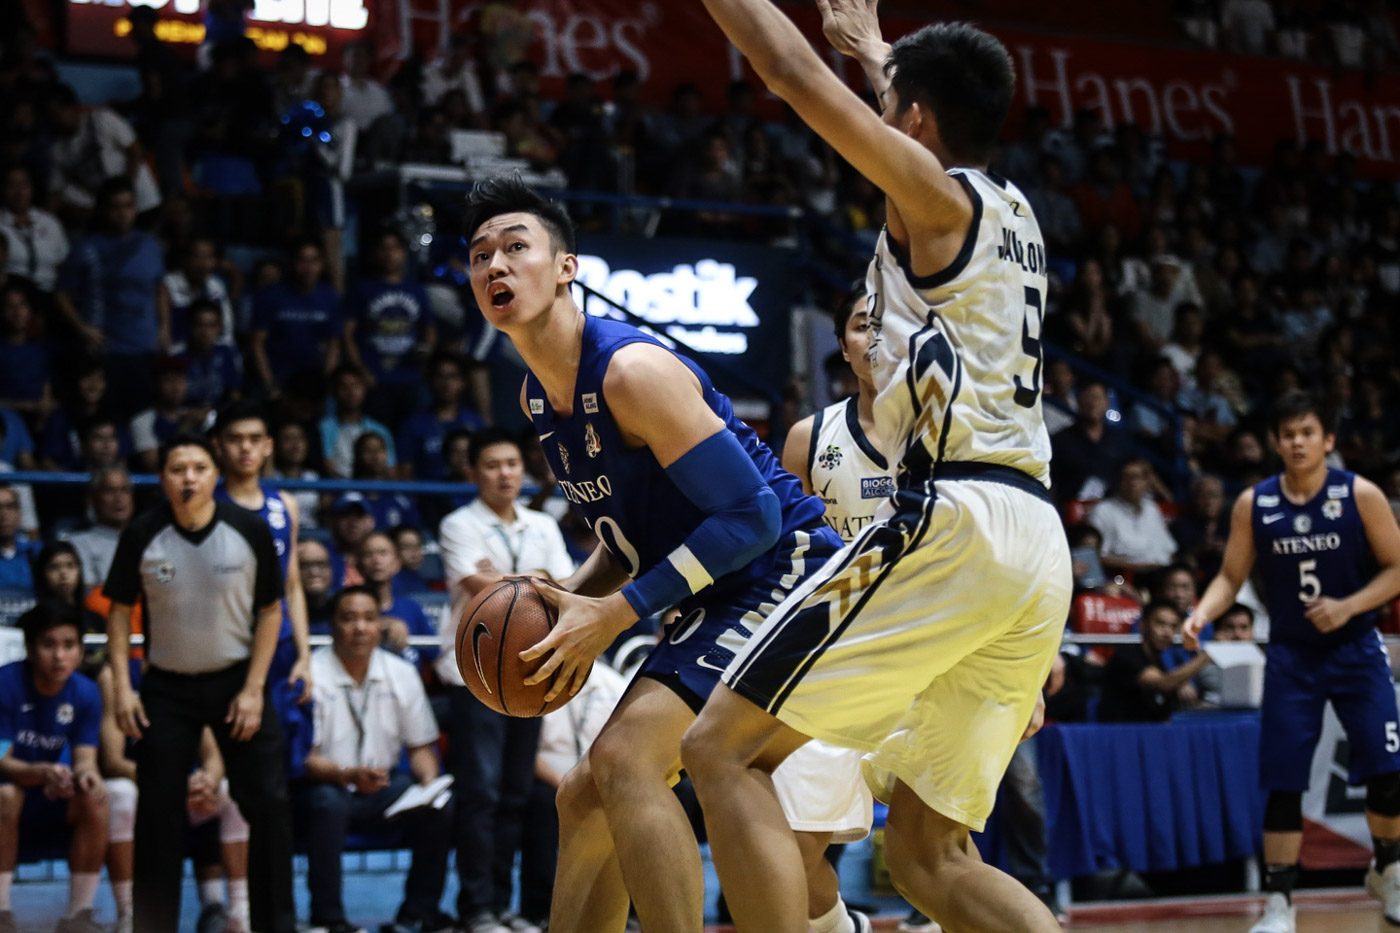 Dave Ildefonso commits to NU, joins dad Danny and brother Shaun